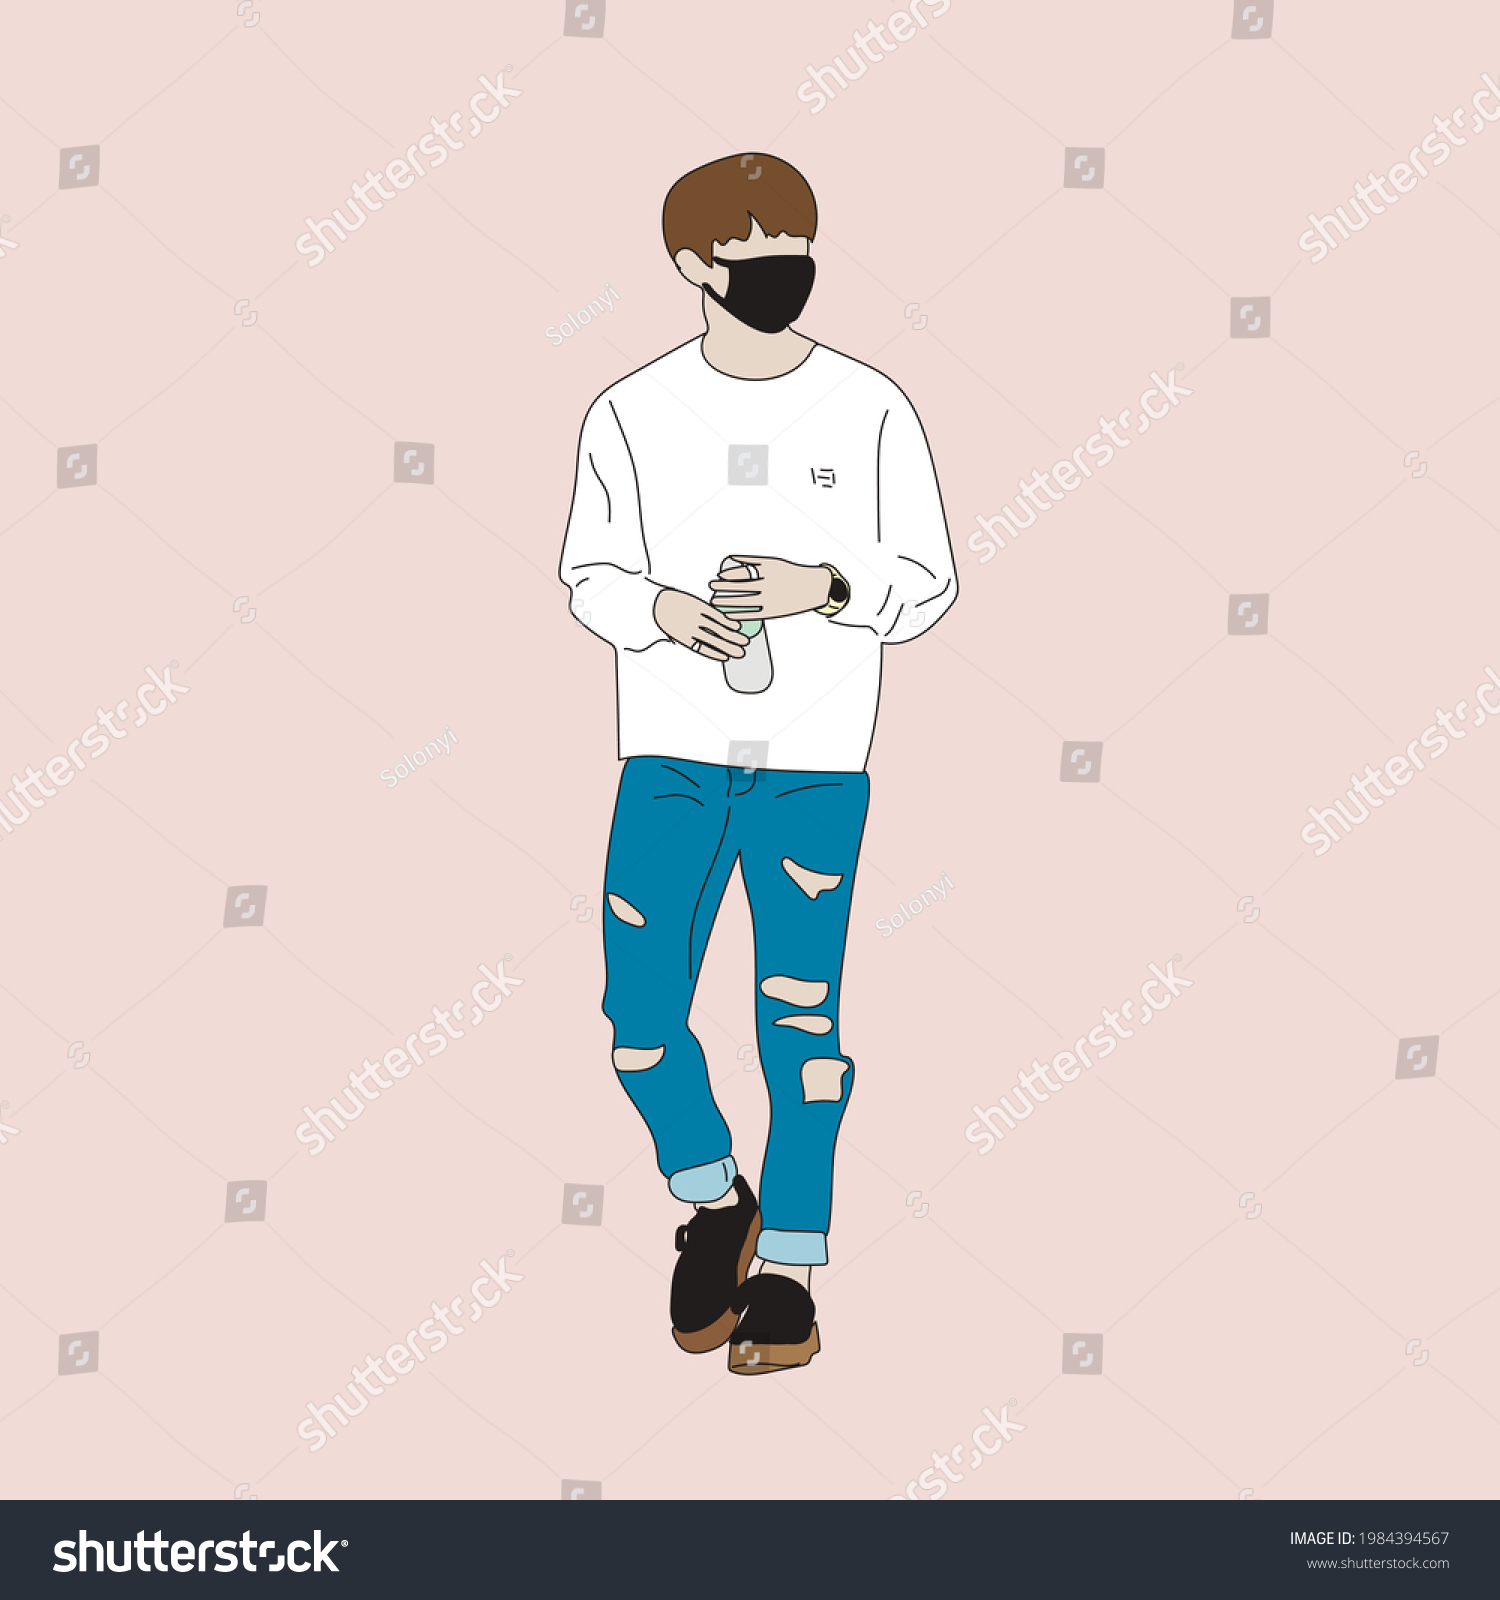 SVG of Vector illustration of Kpop street fashion. Street idols of Koreans. Kpop men's fashion idol. A guy in blue jeans and a white sweatshirt. svg